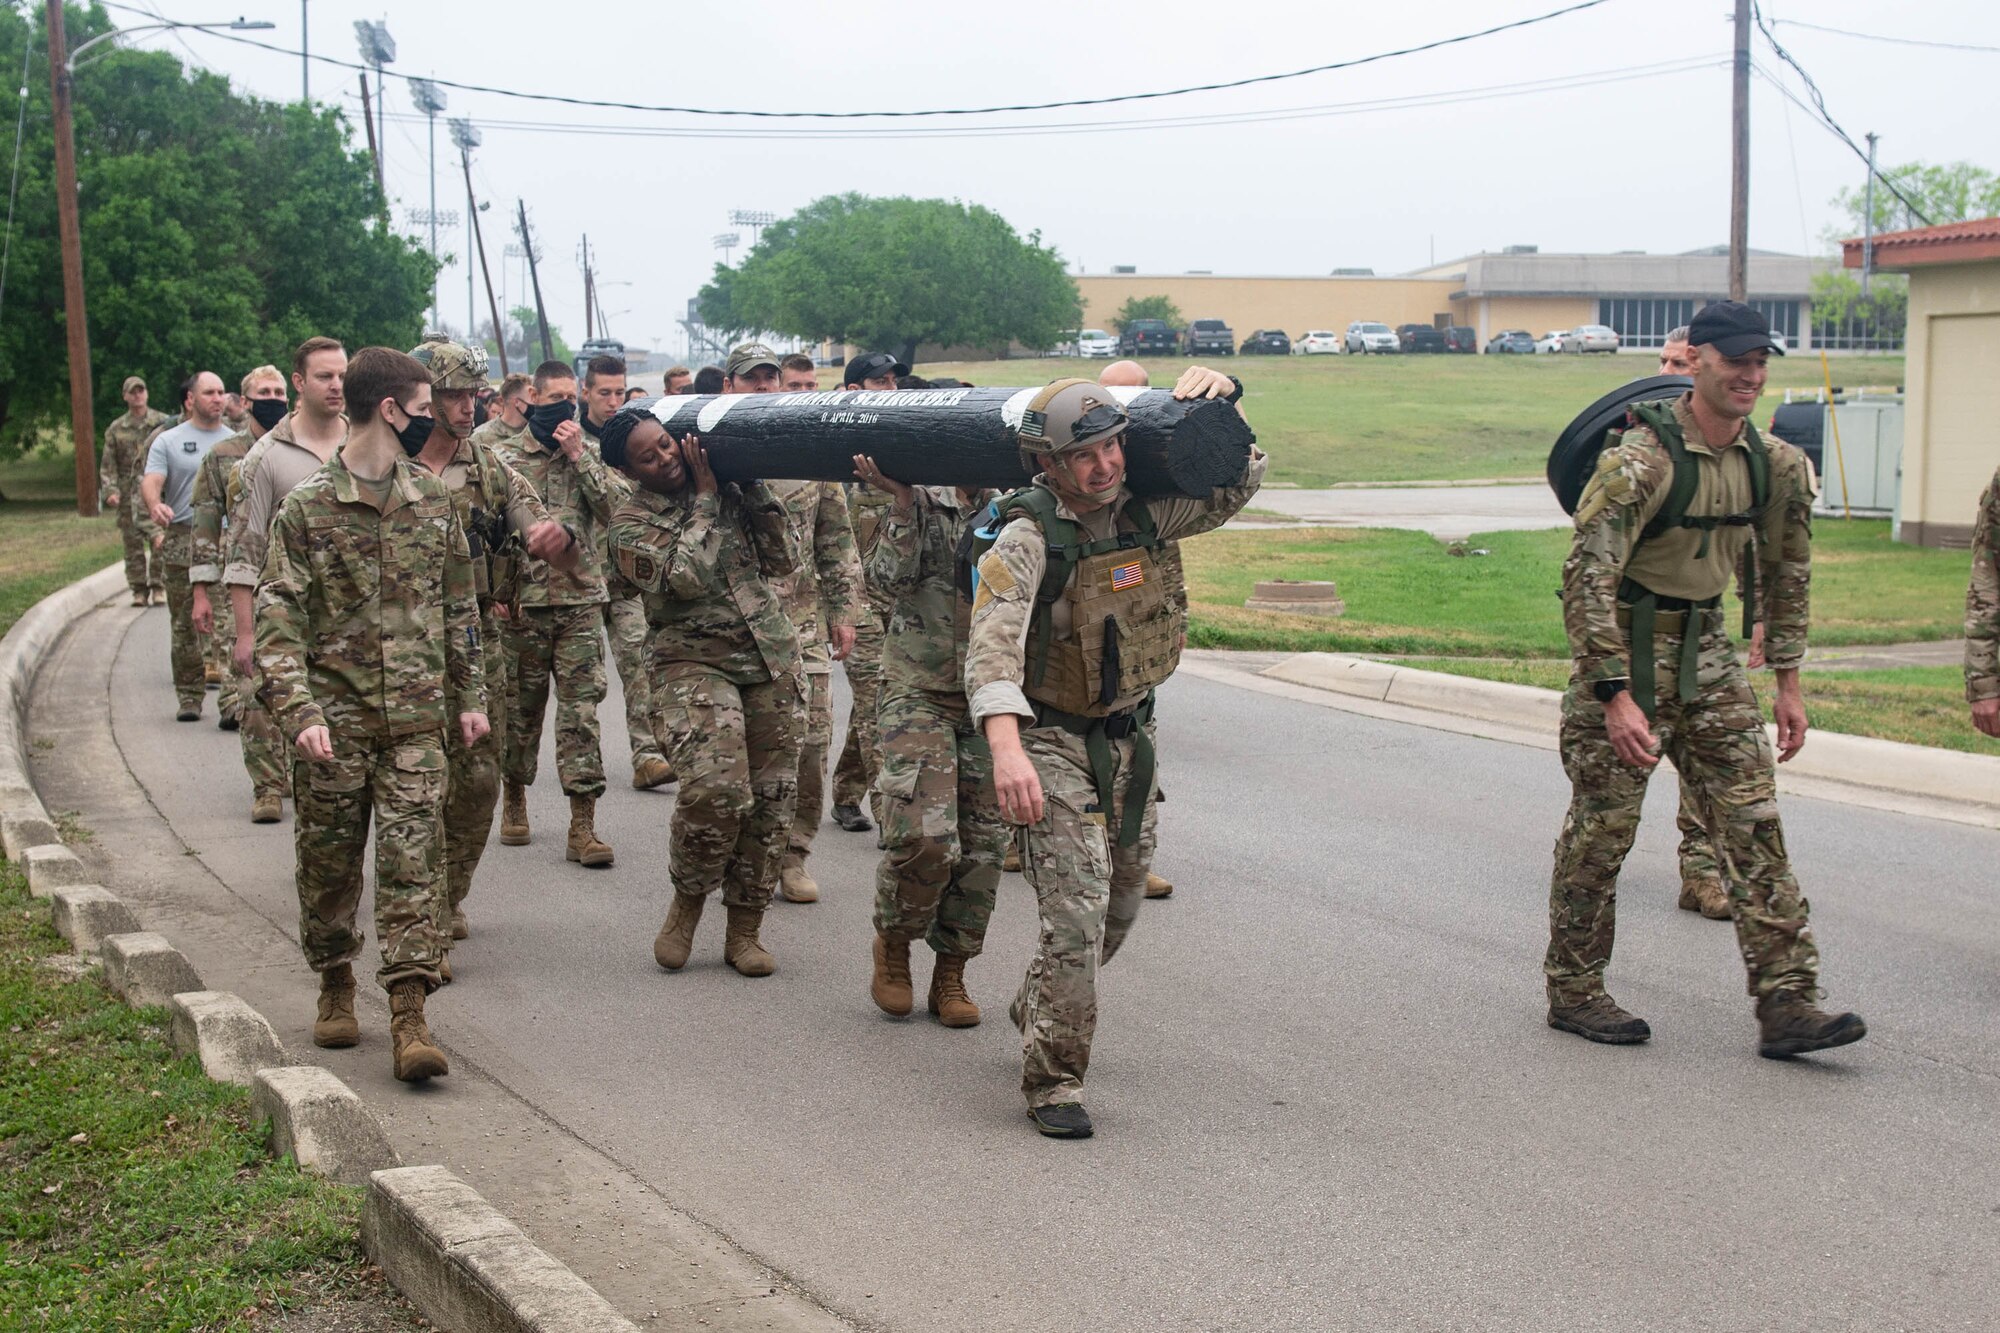 JOINT BASE SAN ANTONIO-CHAPMAN TRAINING ANNEX, Texas—Chief Master Sgt. Todd M. Popovic, Special Warfare Training Wing, or SWTW, command chief, leads a formation in memorial pushups after a memorial log carry for fallen airman, Lt. Col. William Schroeder, at the SWTW located on Joint Base San Antonio-Chapman Training Annex, or JBSA-CTA, Apr. 8, 2021.